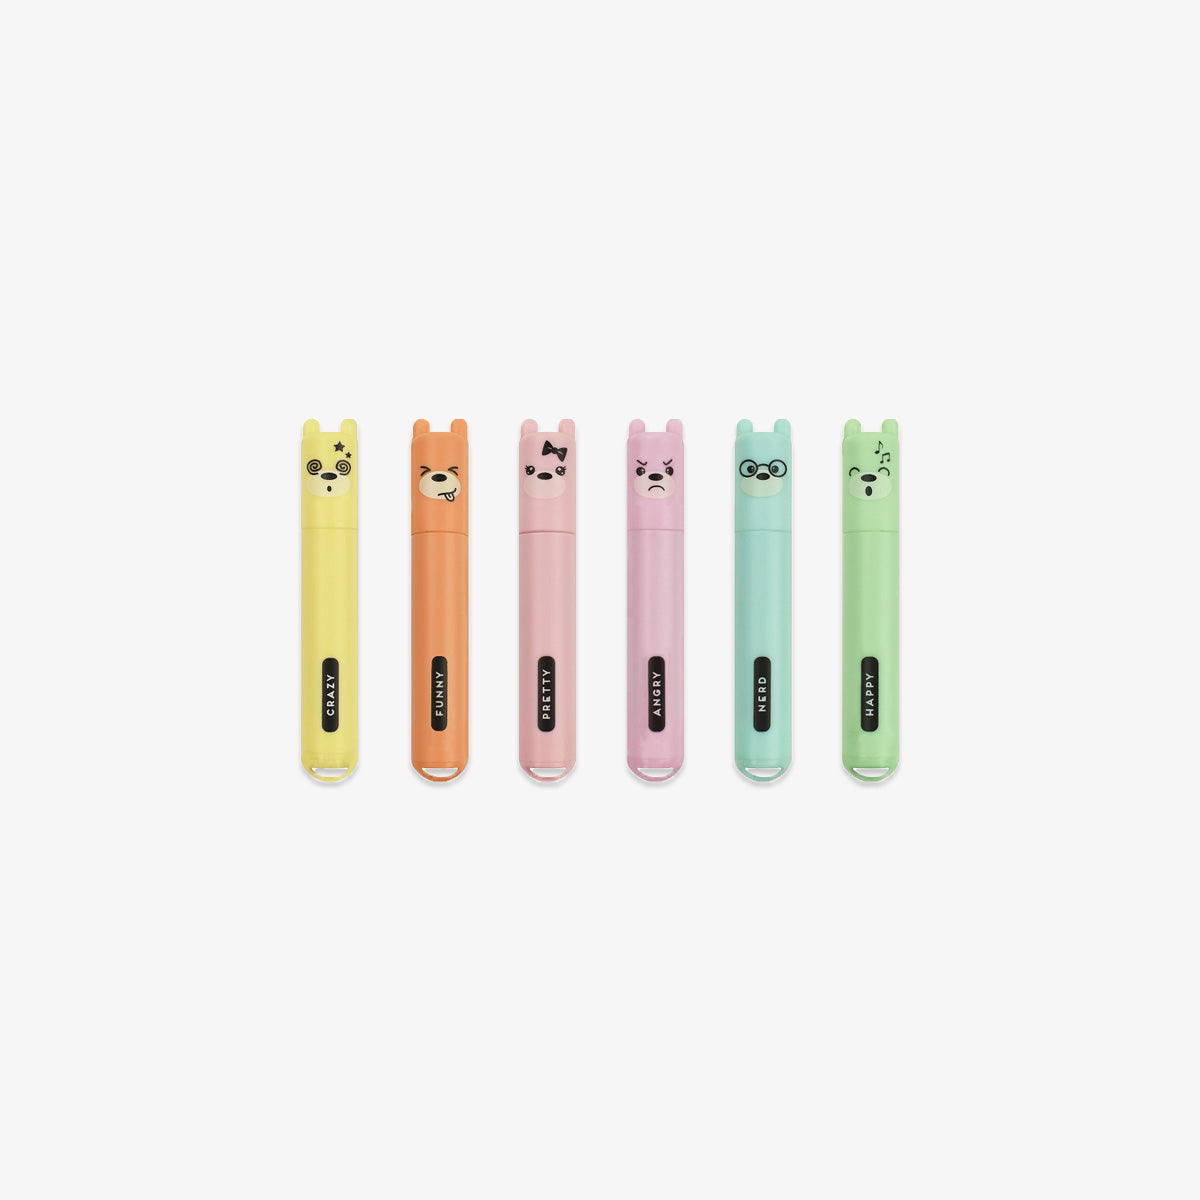 TEDDY'S STYLE MINI HIGHLIGHTERS // SET OF 6